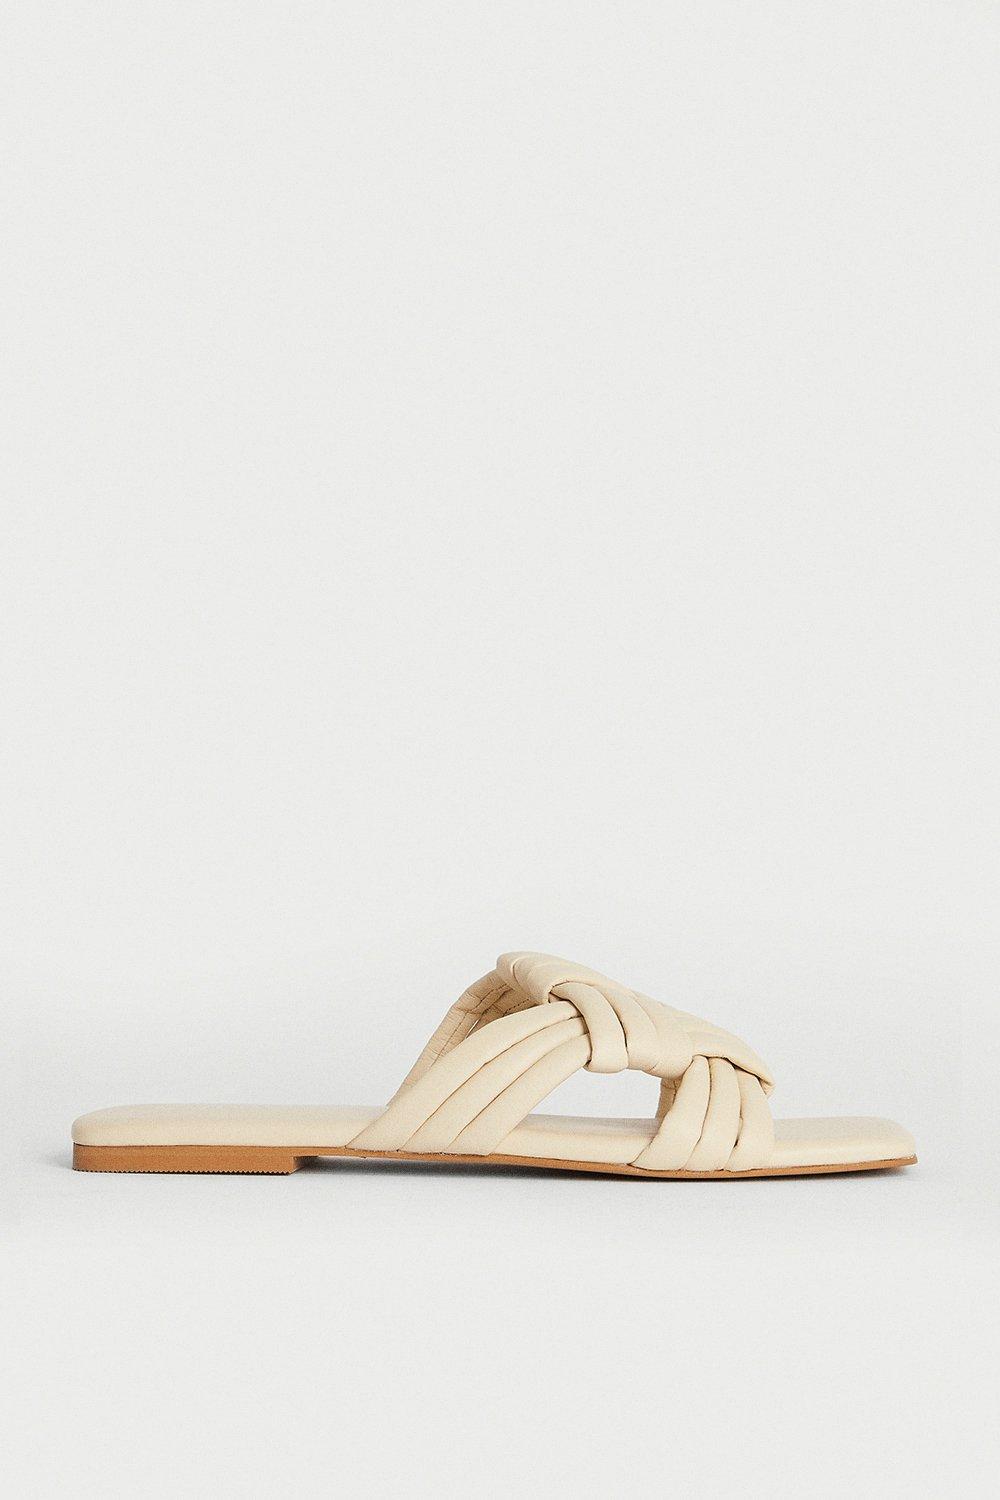 Real Leather Square Toe Cross Over Sandal